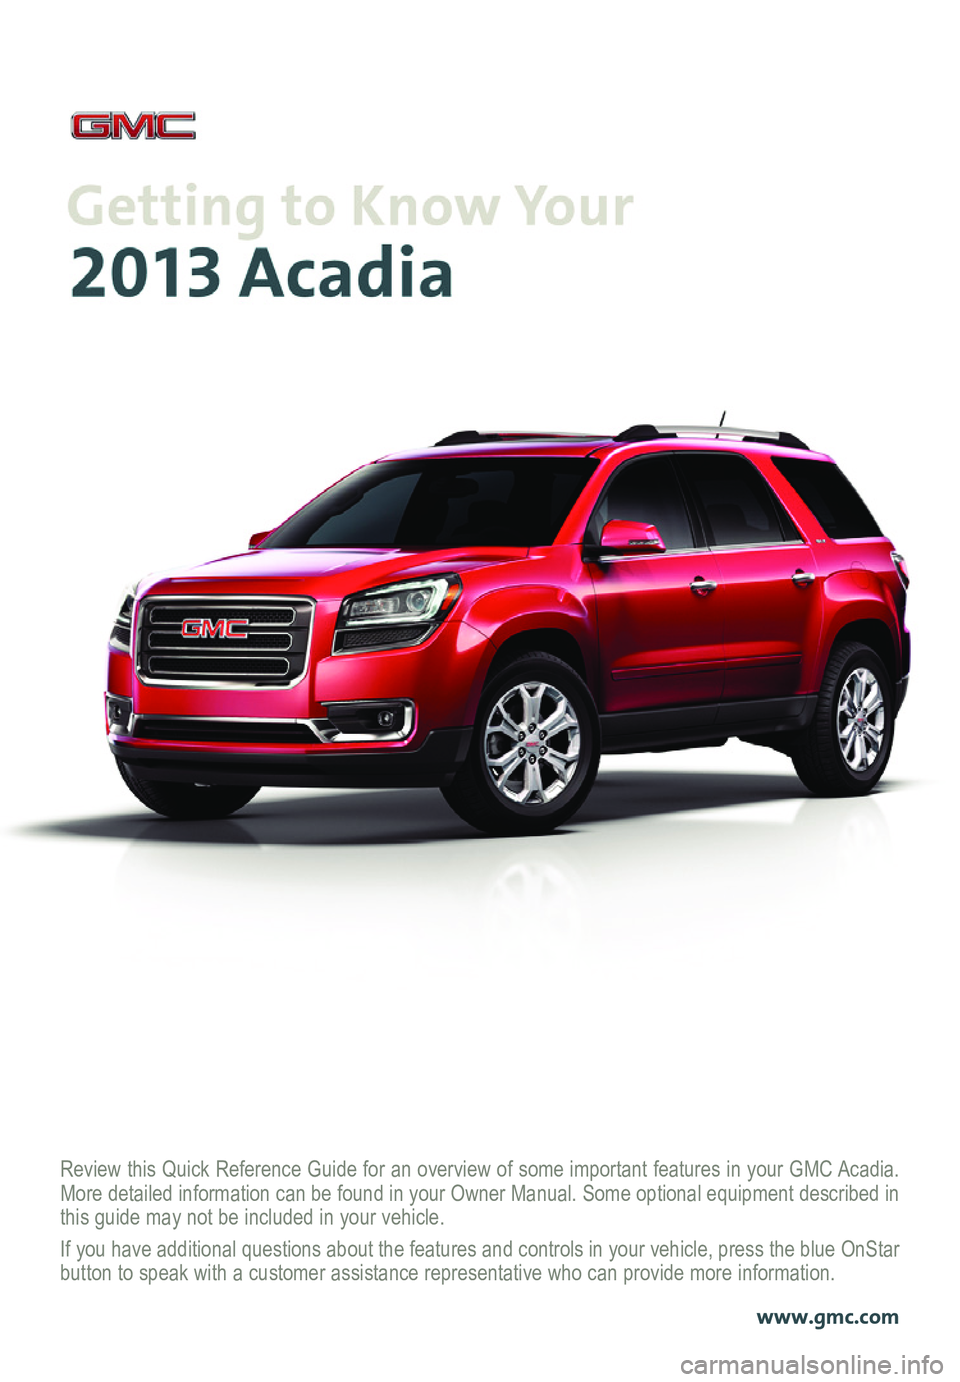 GMC ACADIA 2013  Get To Know Guide 